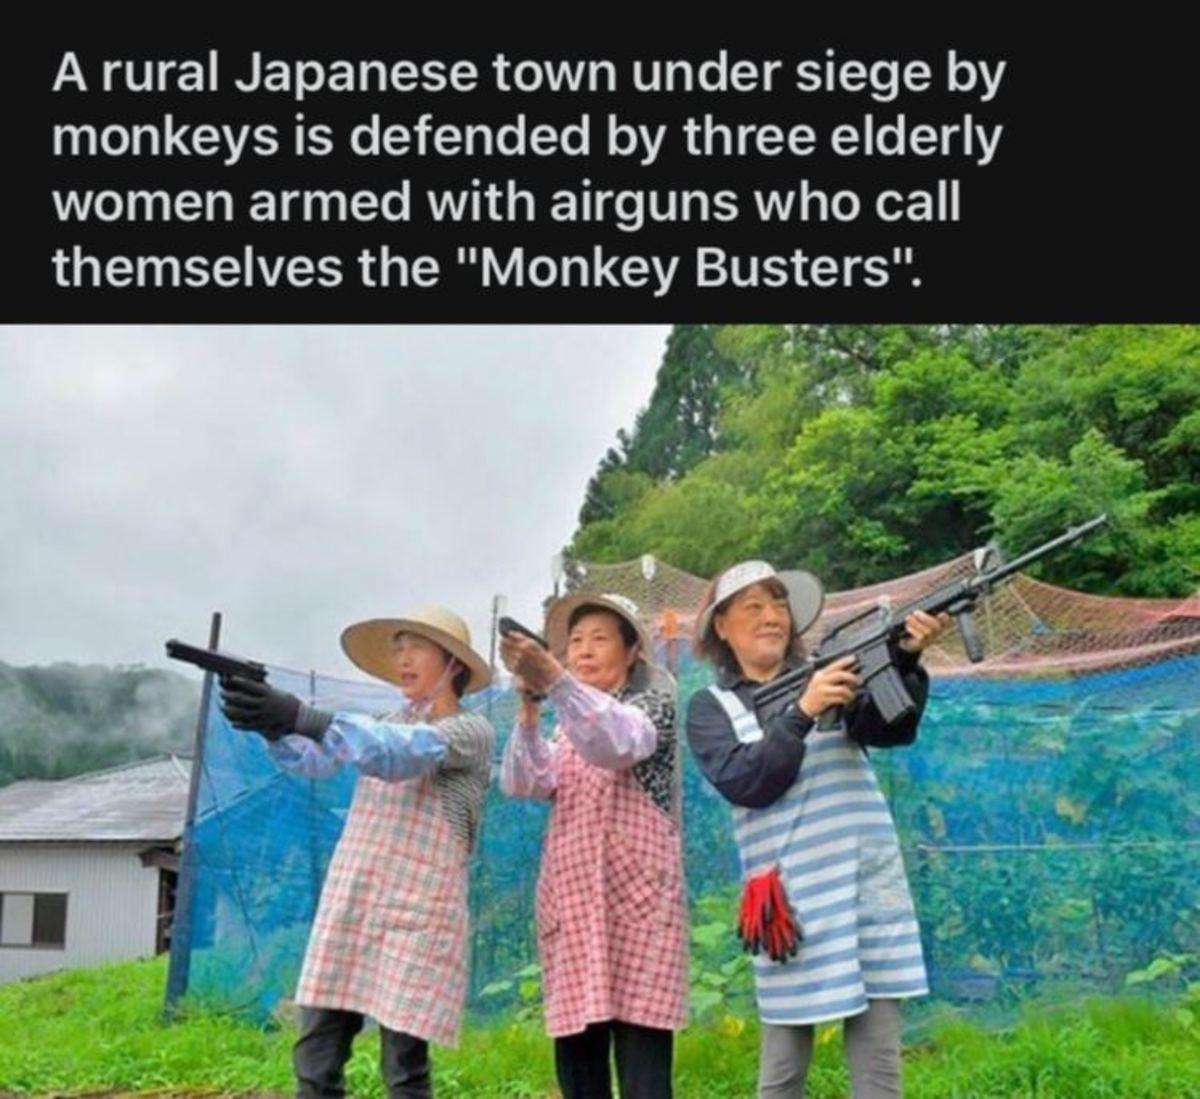 monkey busters japan - A rural Japanese town under siege by monkeys is defended by three elderly women armed with airguns who call themselves the "Monkey Busters".